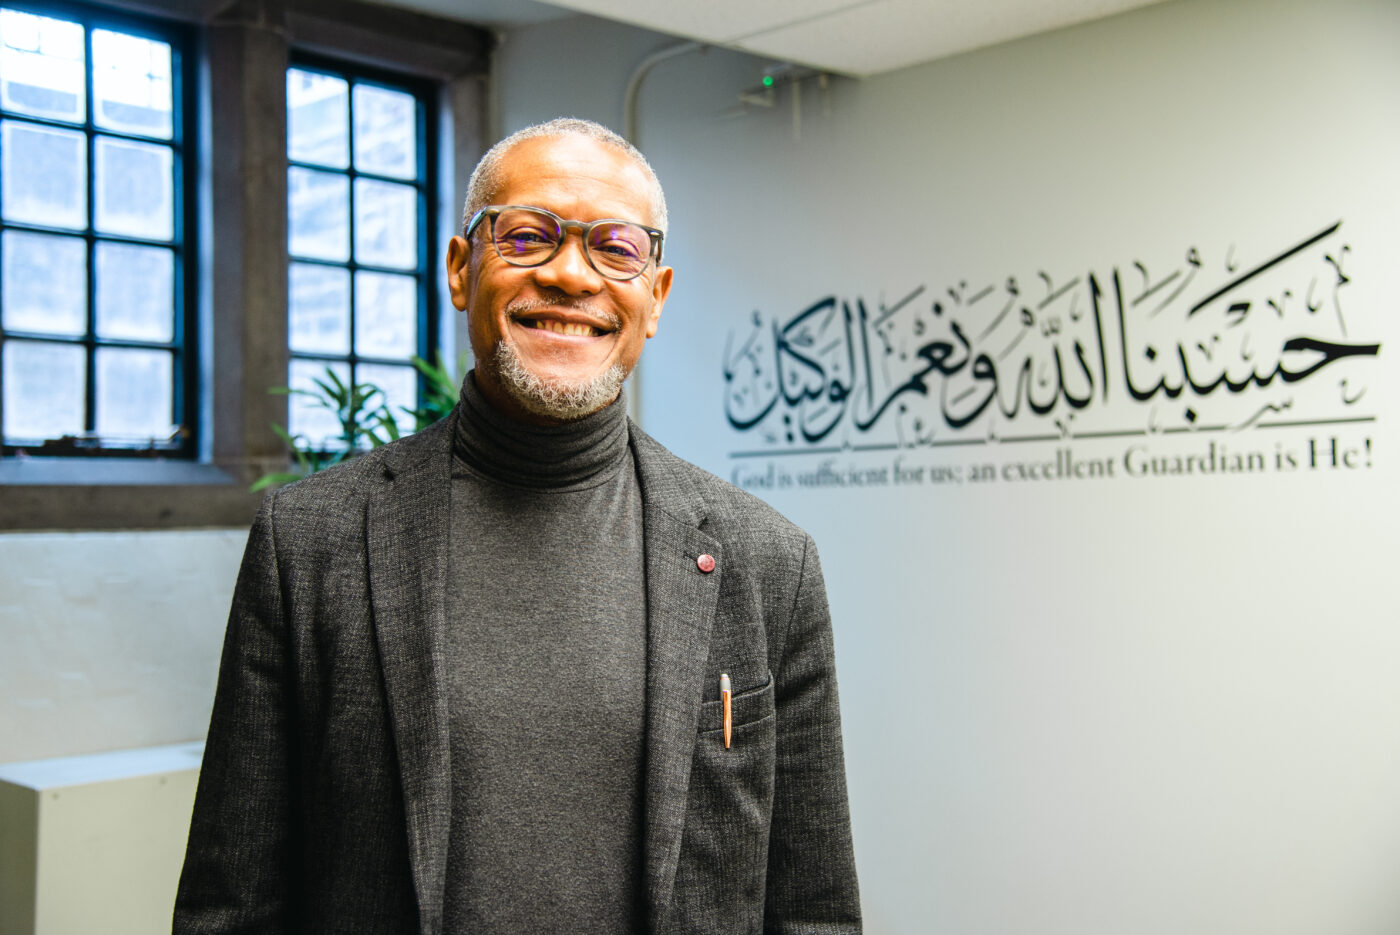 Imam Yasin Dwyer, the voice of Ruh, stands in his chaplaincy office in Emmanuel College on April 20, 2023.